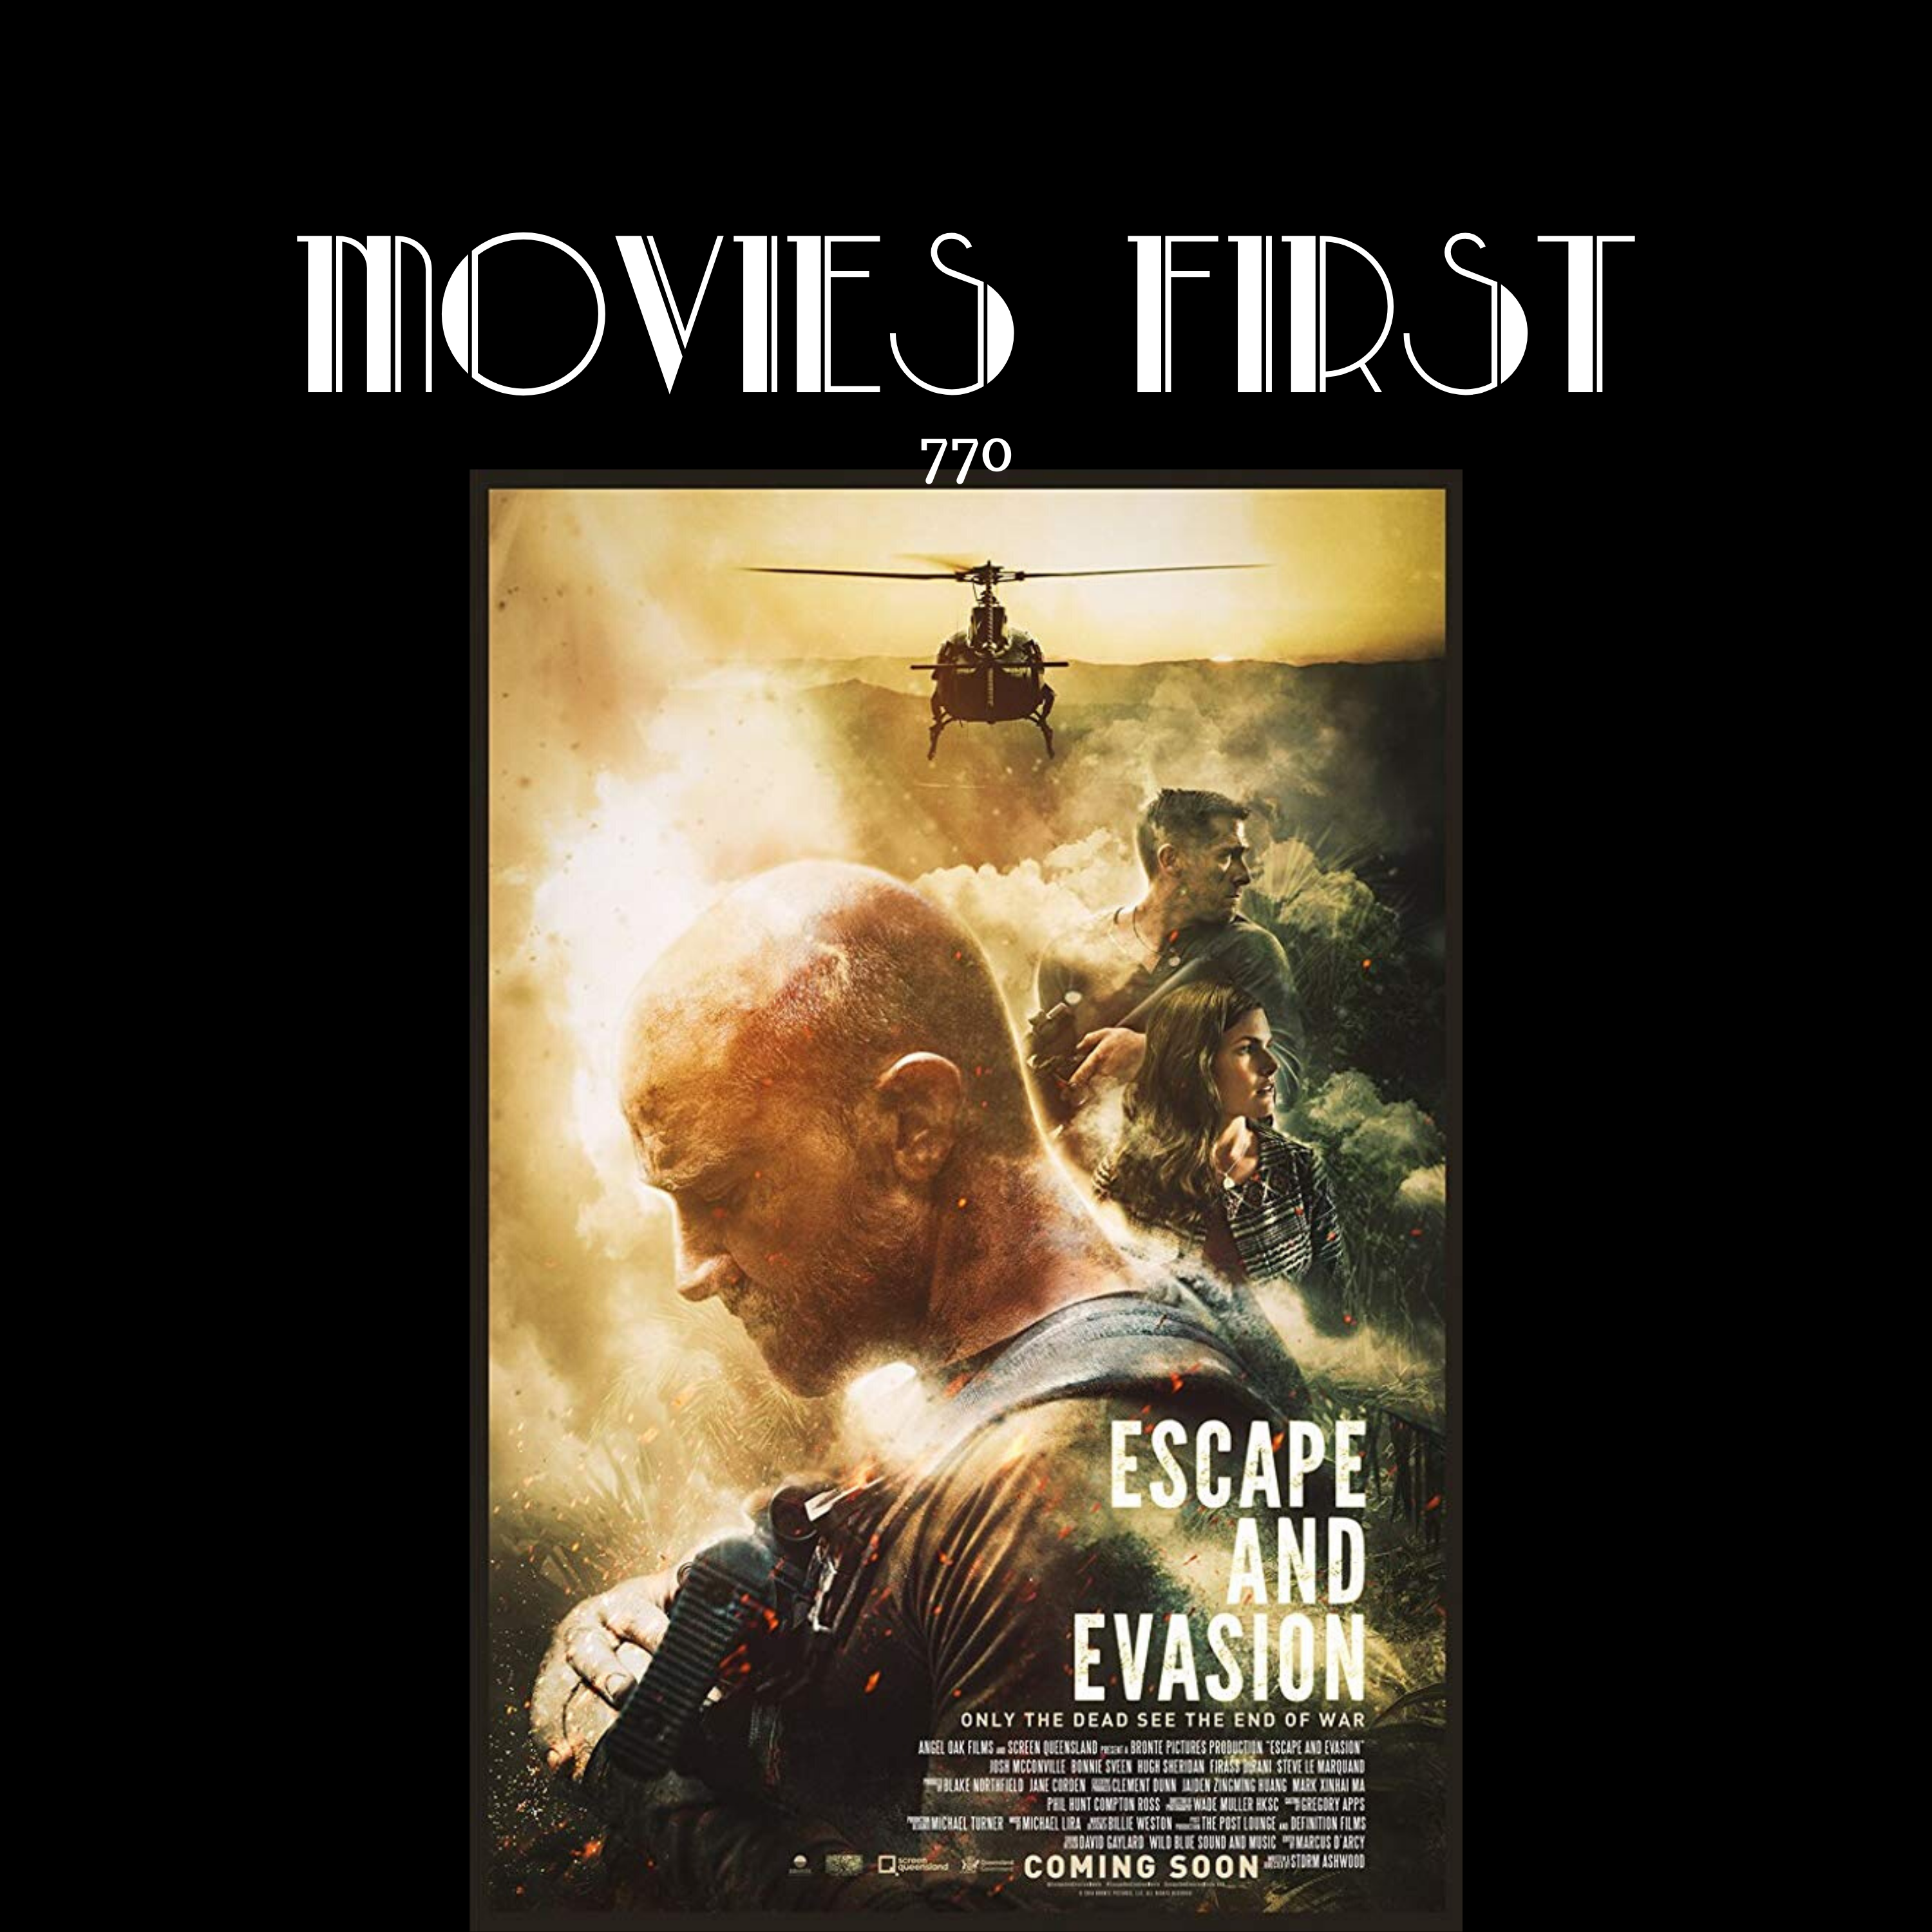 Escape and Evasion (Drama, War)(the @MoviesFirst review)